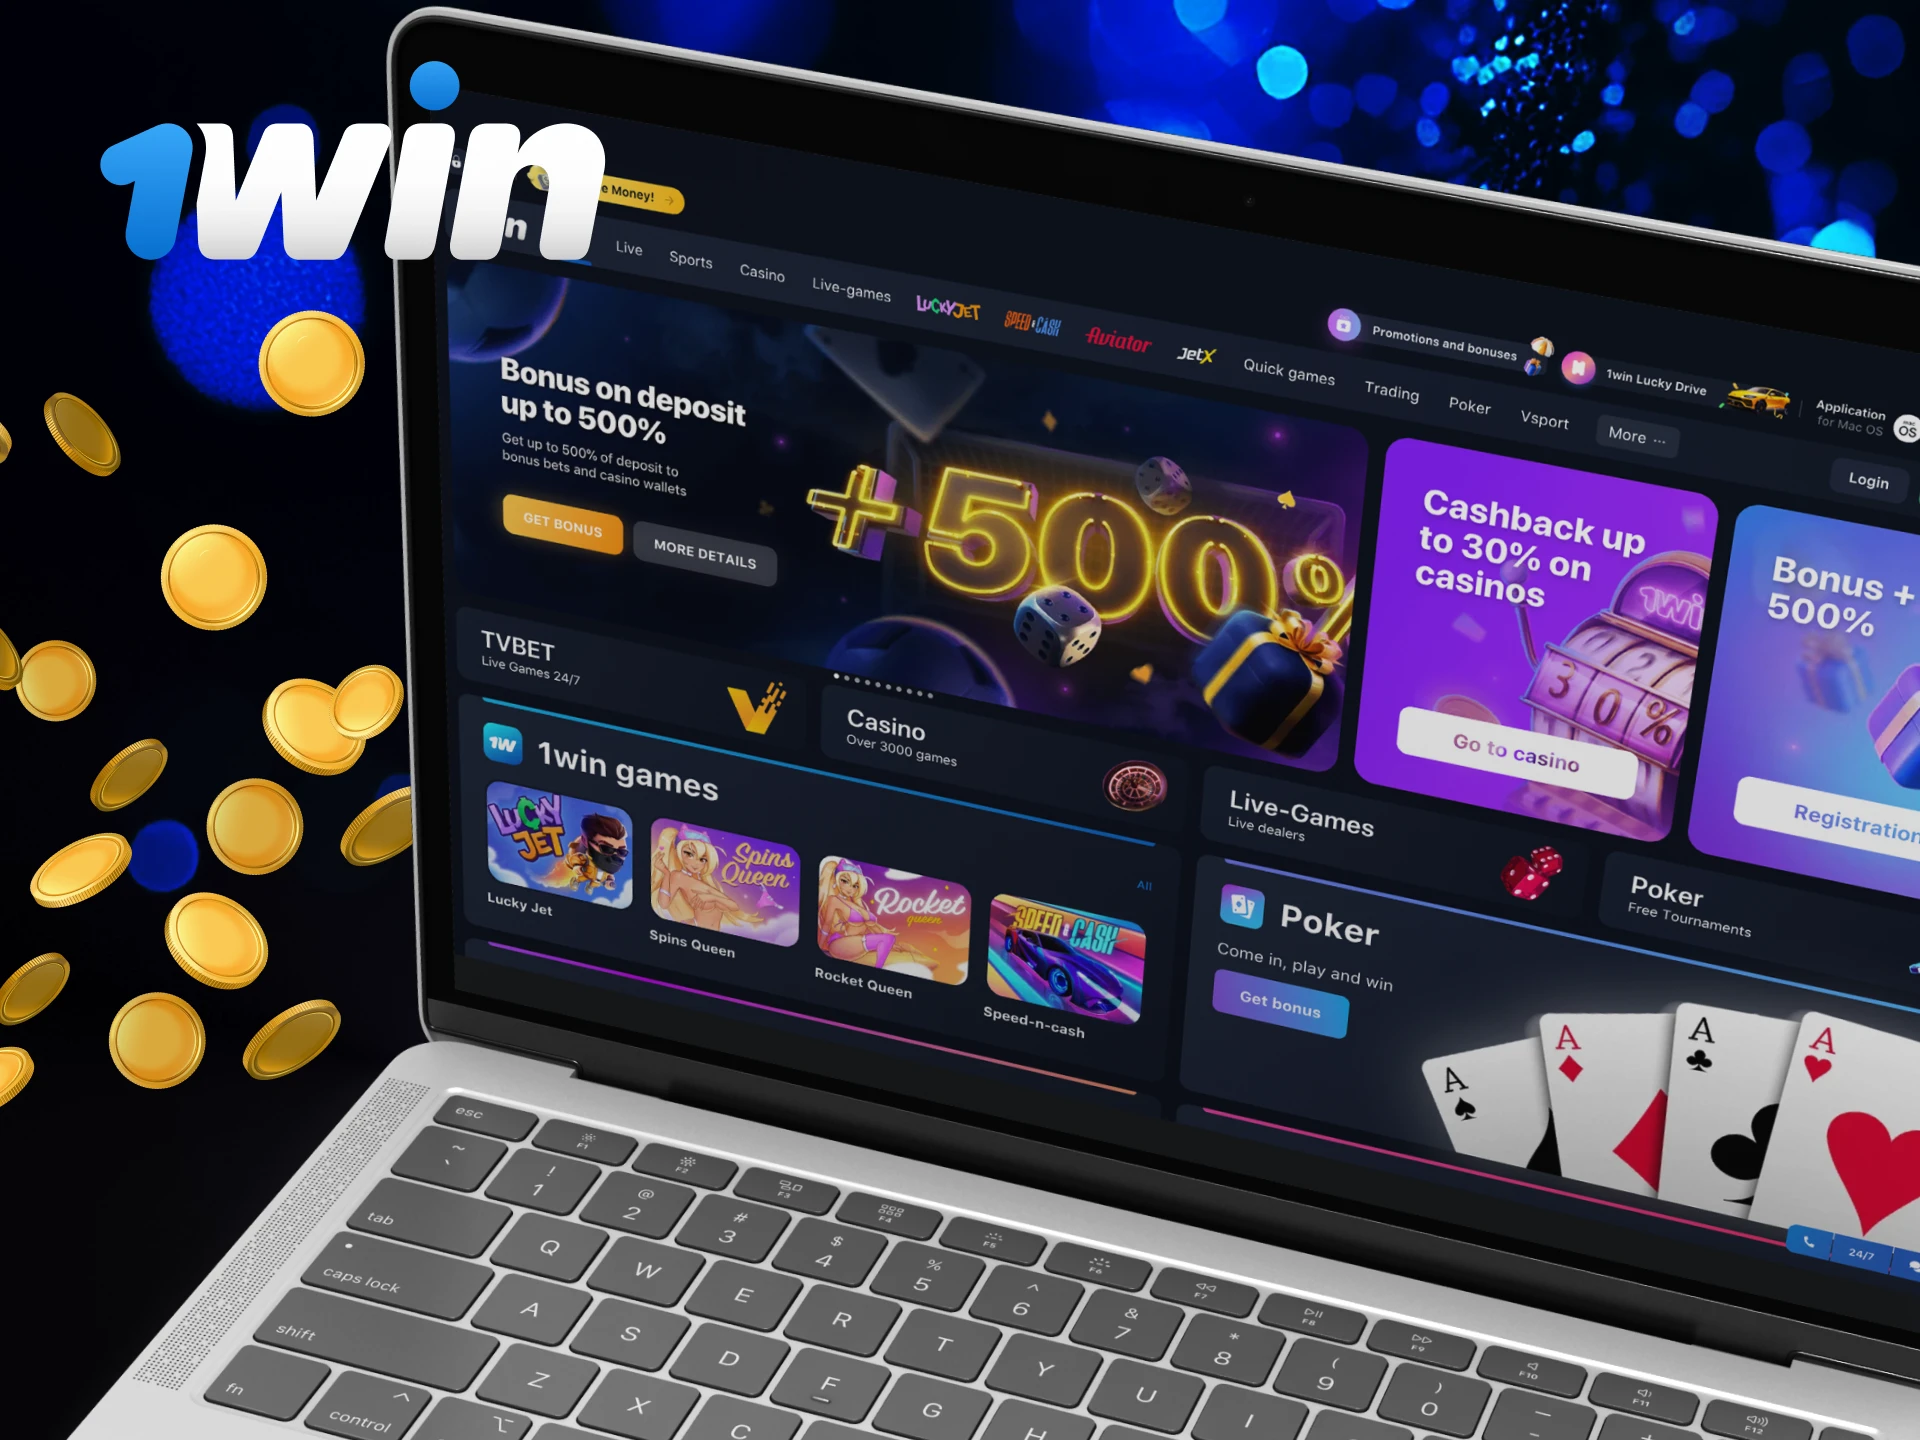 Advantages of the Aviator game on the 1win casino website.